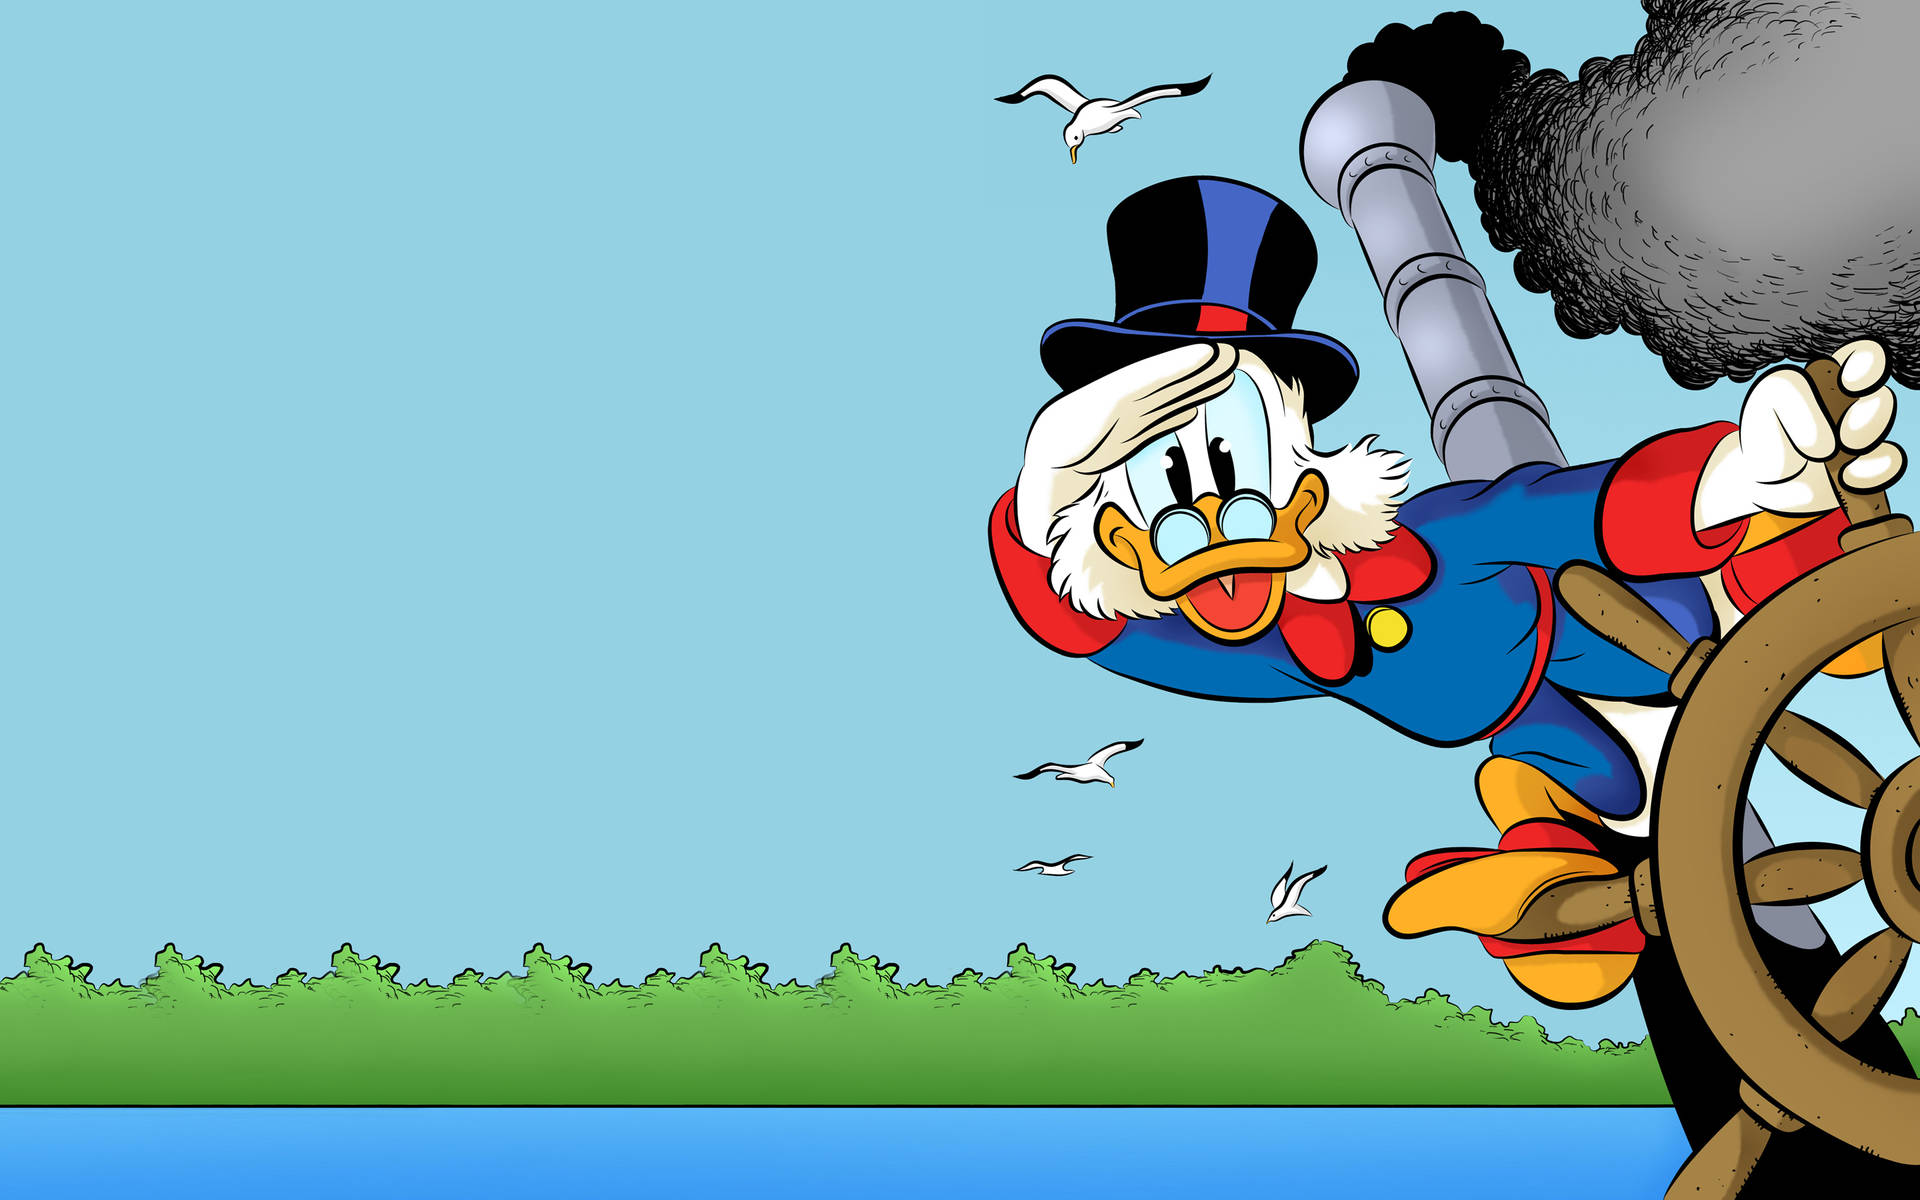 A Vibrant Illustration Of Scrooge Mcduck Piloting A Ship